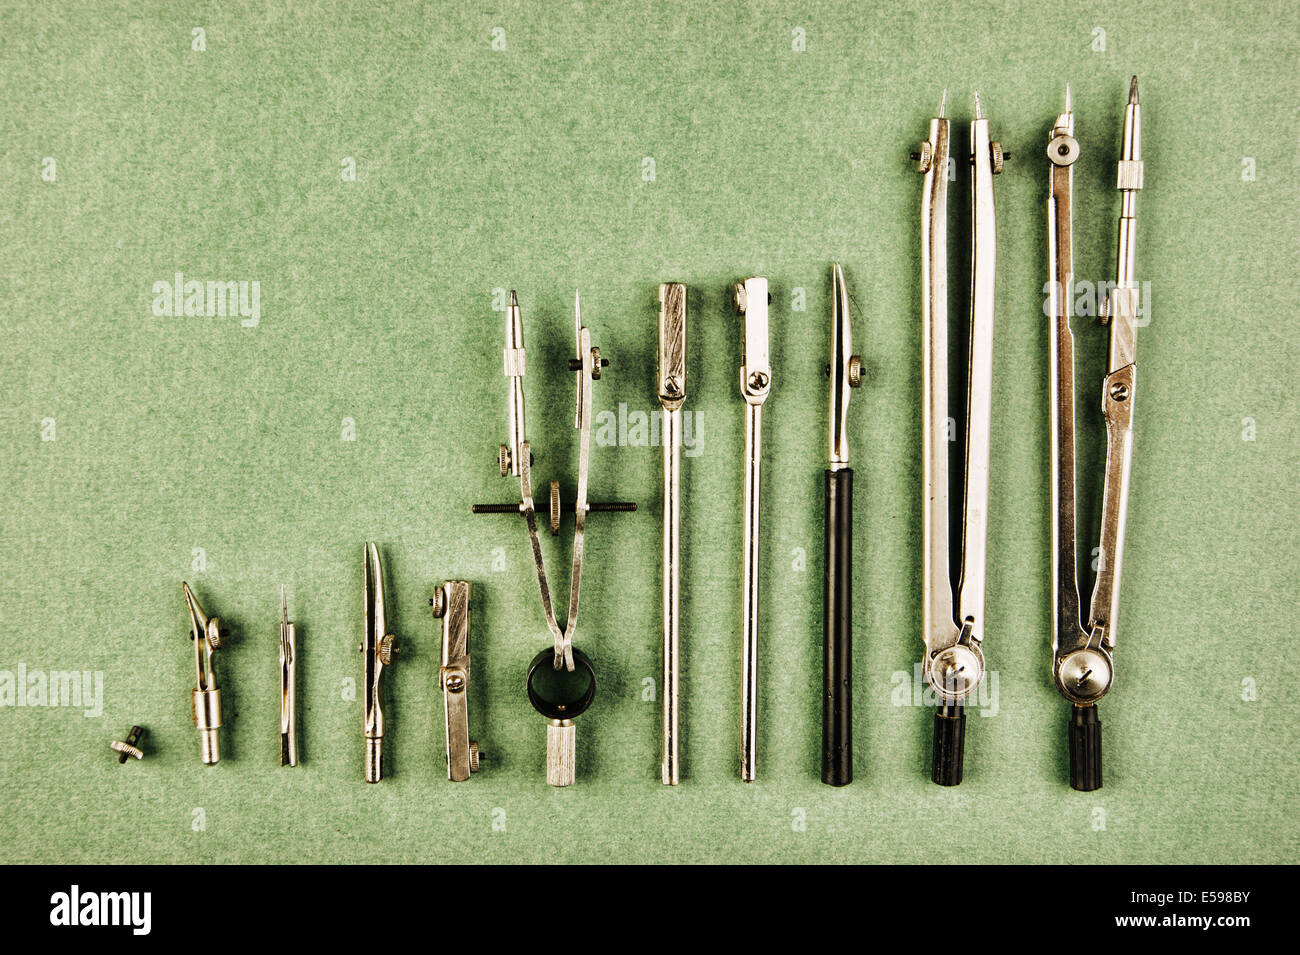 Old drawing tools on a green background Stock Photo